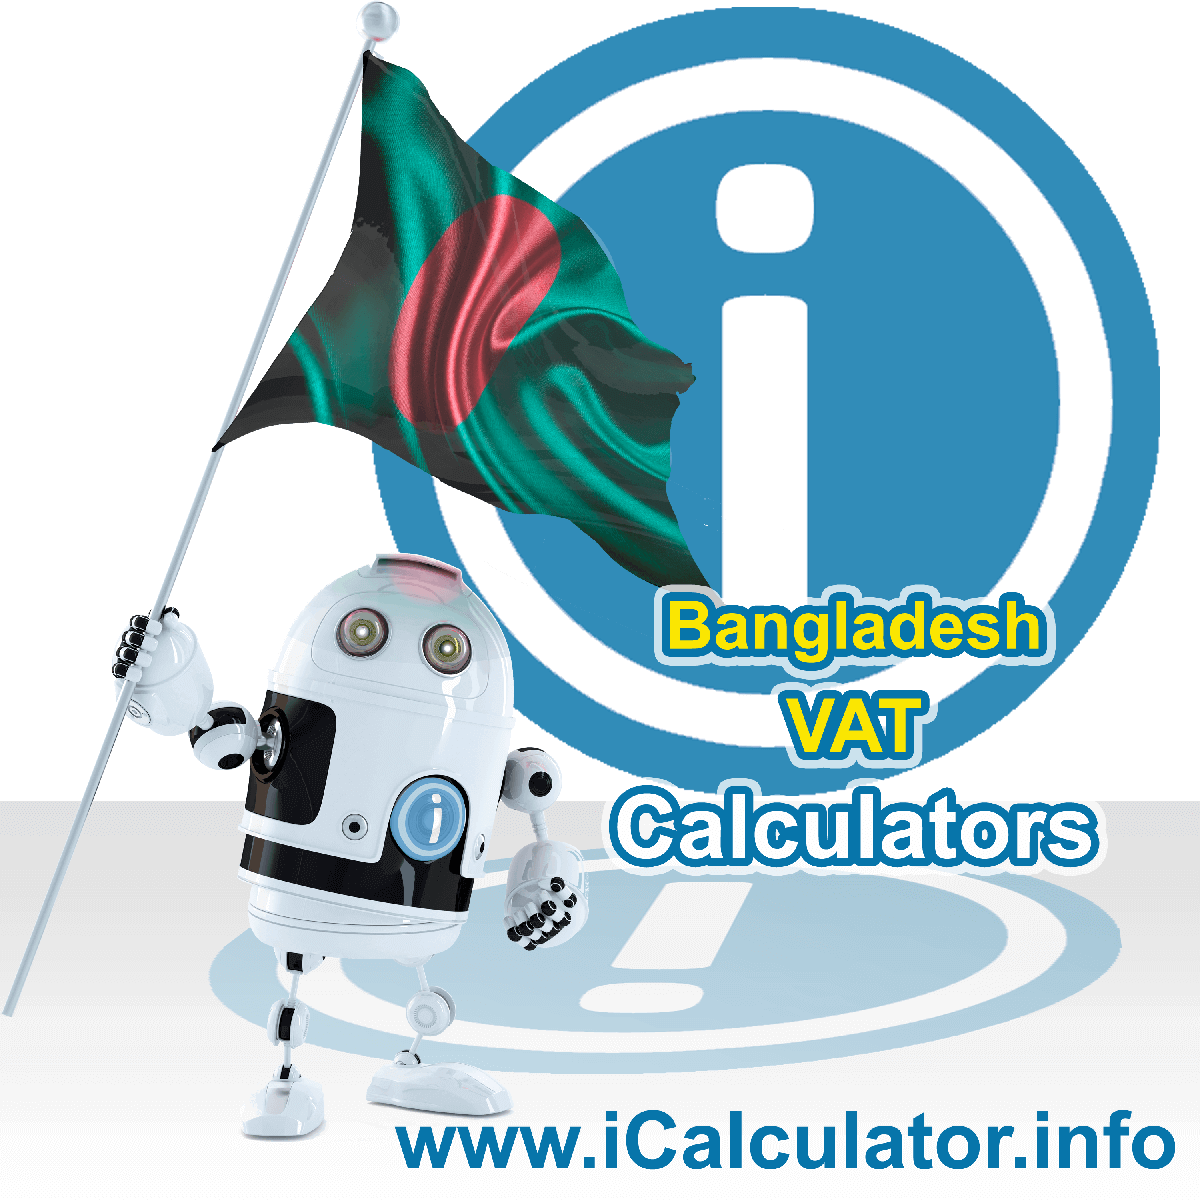 Bangladesh VAT Calculator. This image shows the Bangladesh flag and information relating to the VAT formula used for calculating Value Added Tax in Bangladesh using the Bangladesh VAT Calculator in 2023